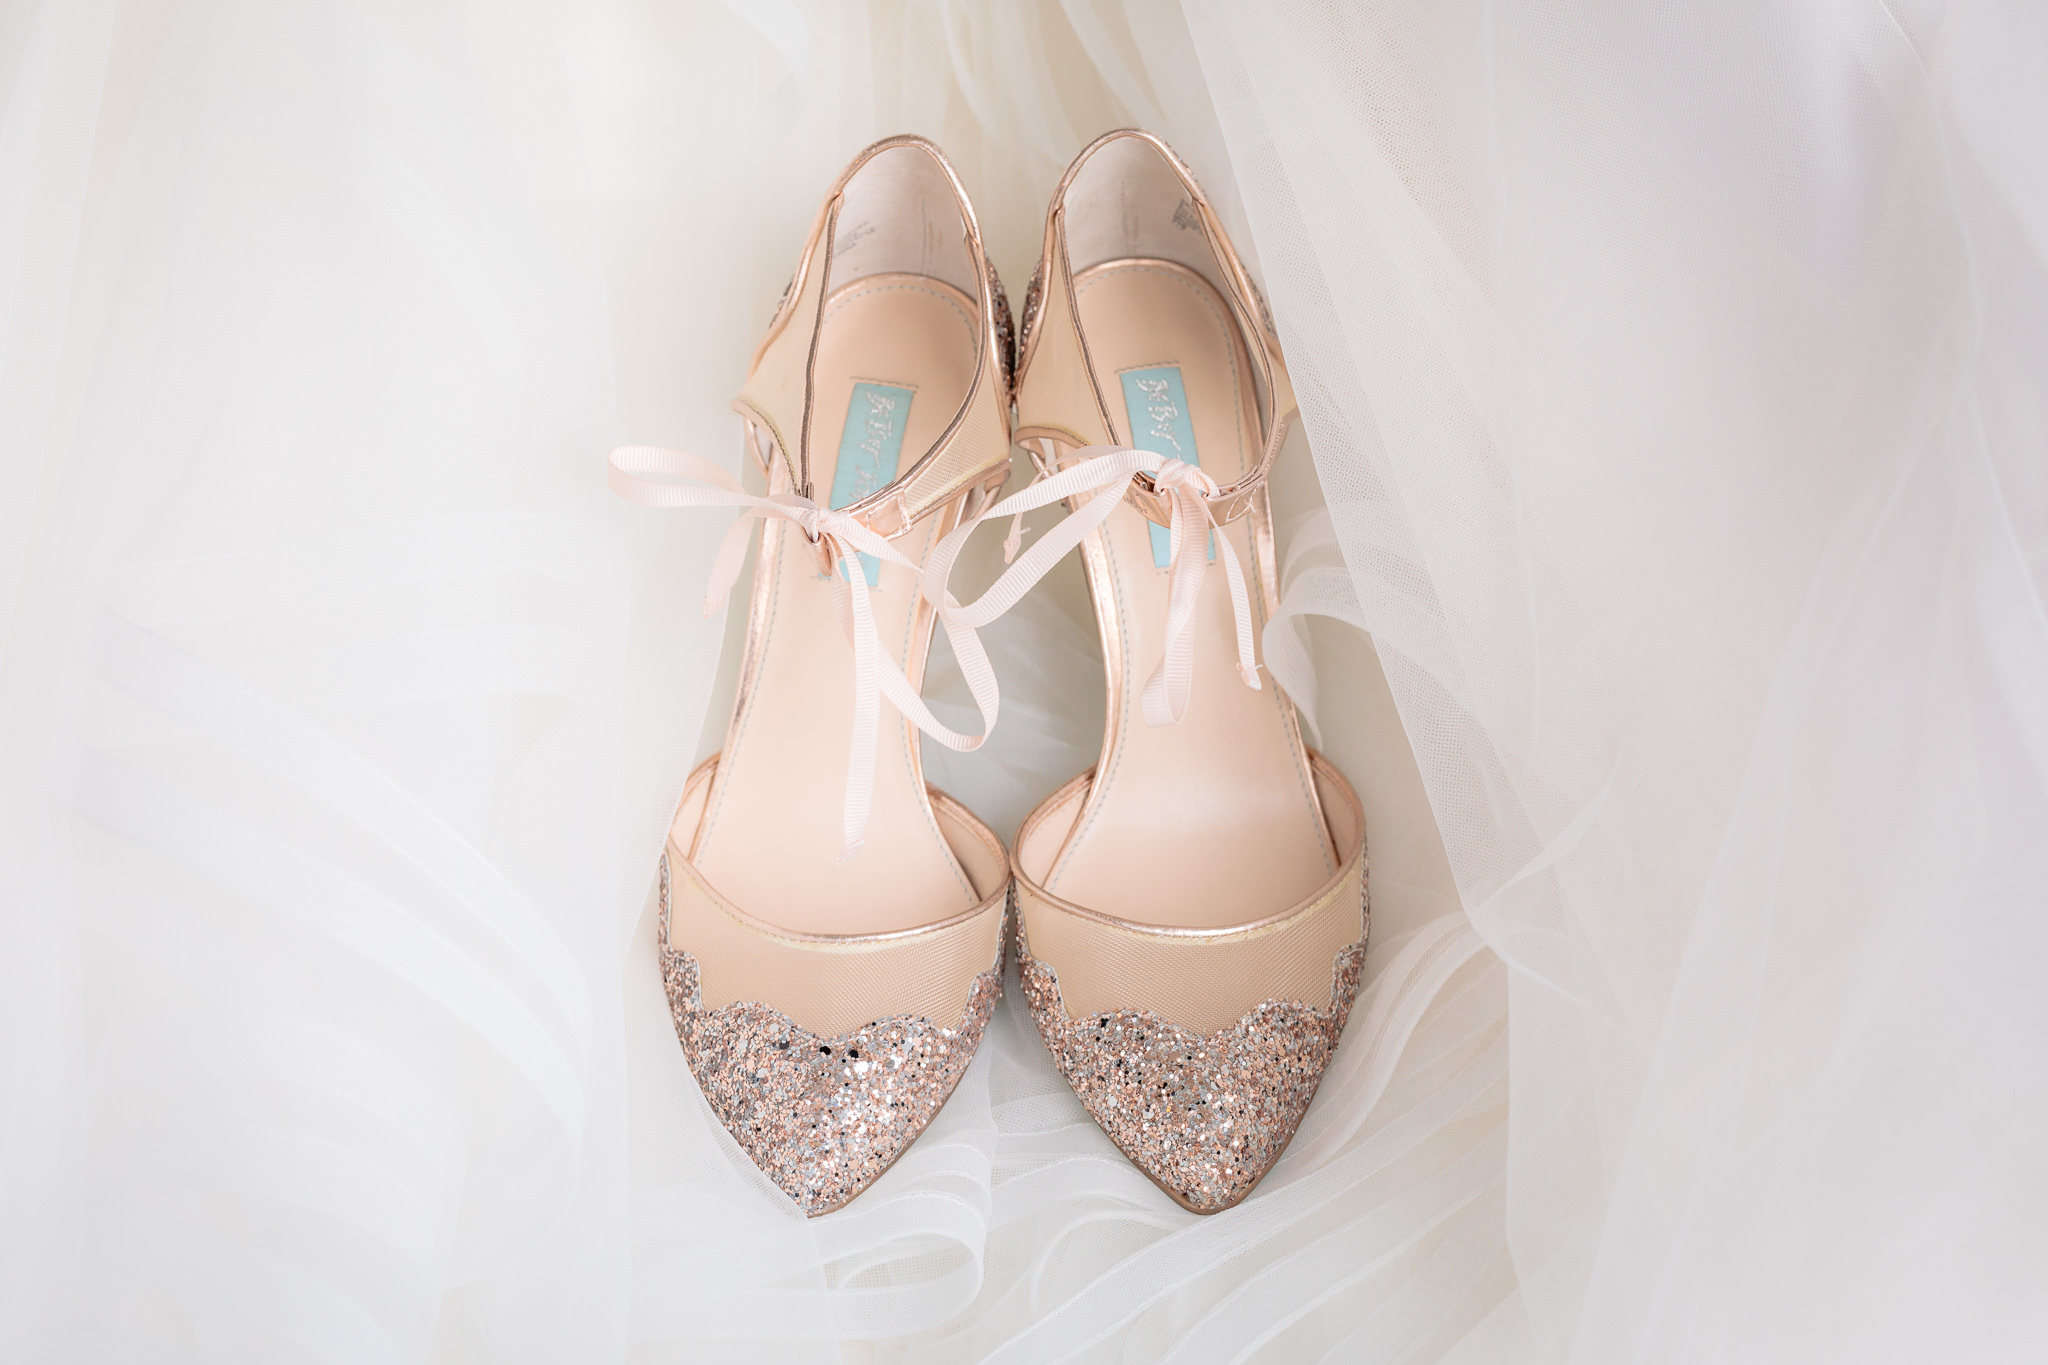 Bride's gold glitter wedding shoes rest on the white tulle skirt of her Allure bridal gown